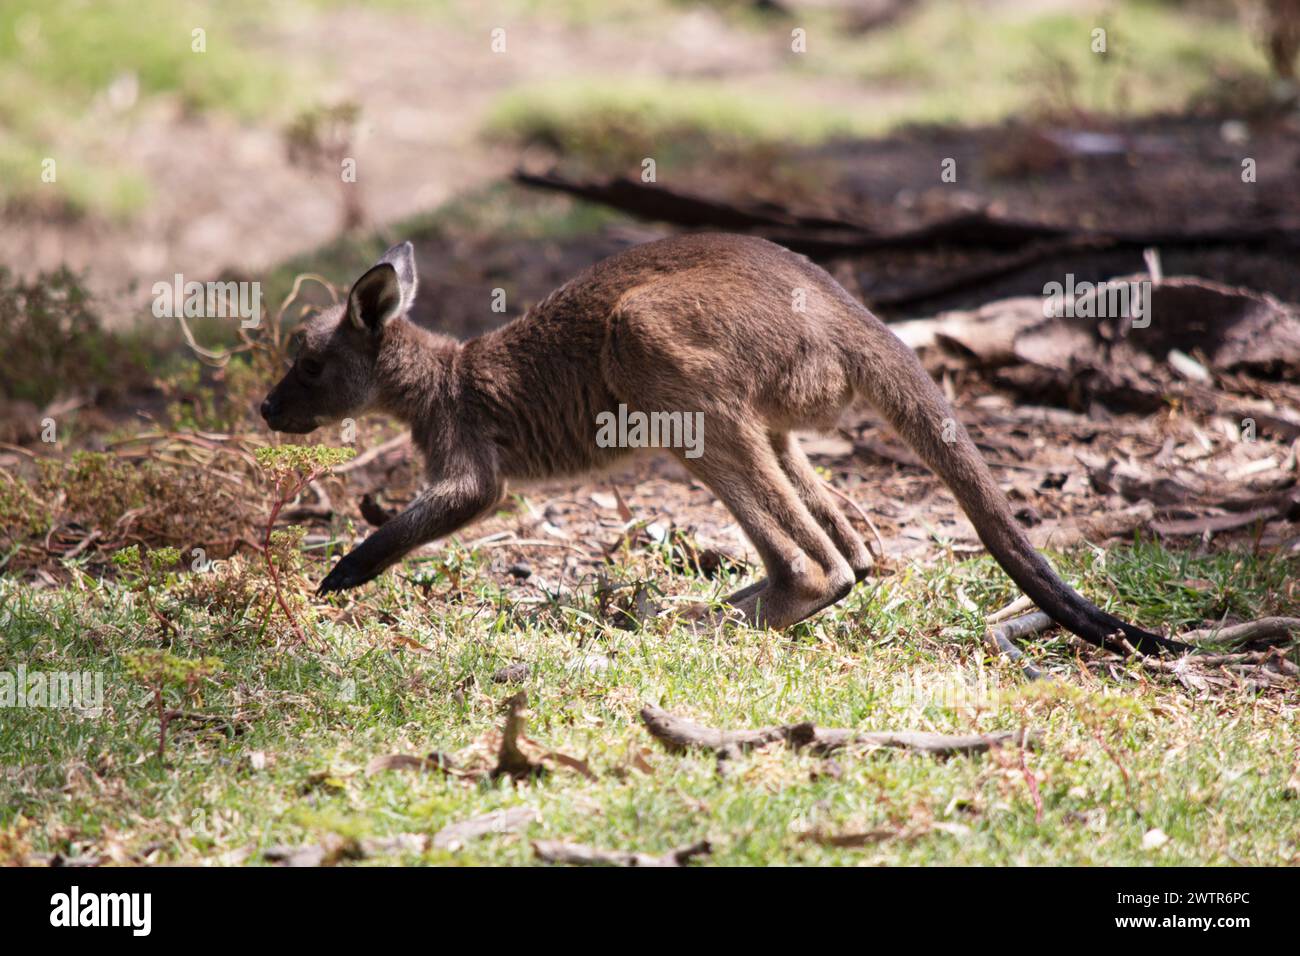 the kangaroo-Island Kangaroo joey has a brown body with a white under belly. They also have black feet and paws Stock Photo